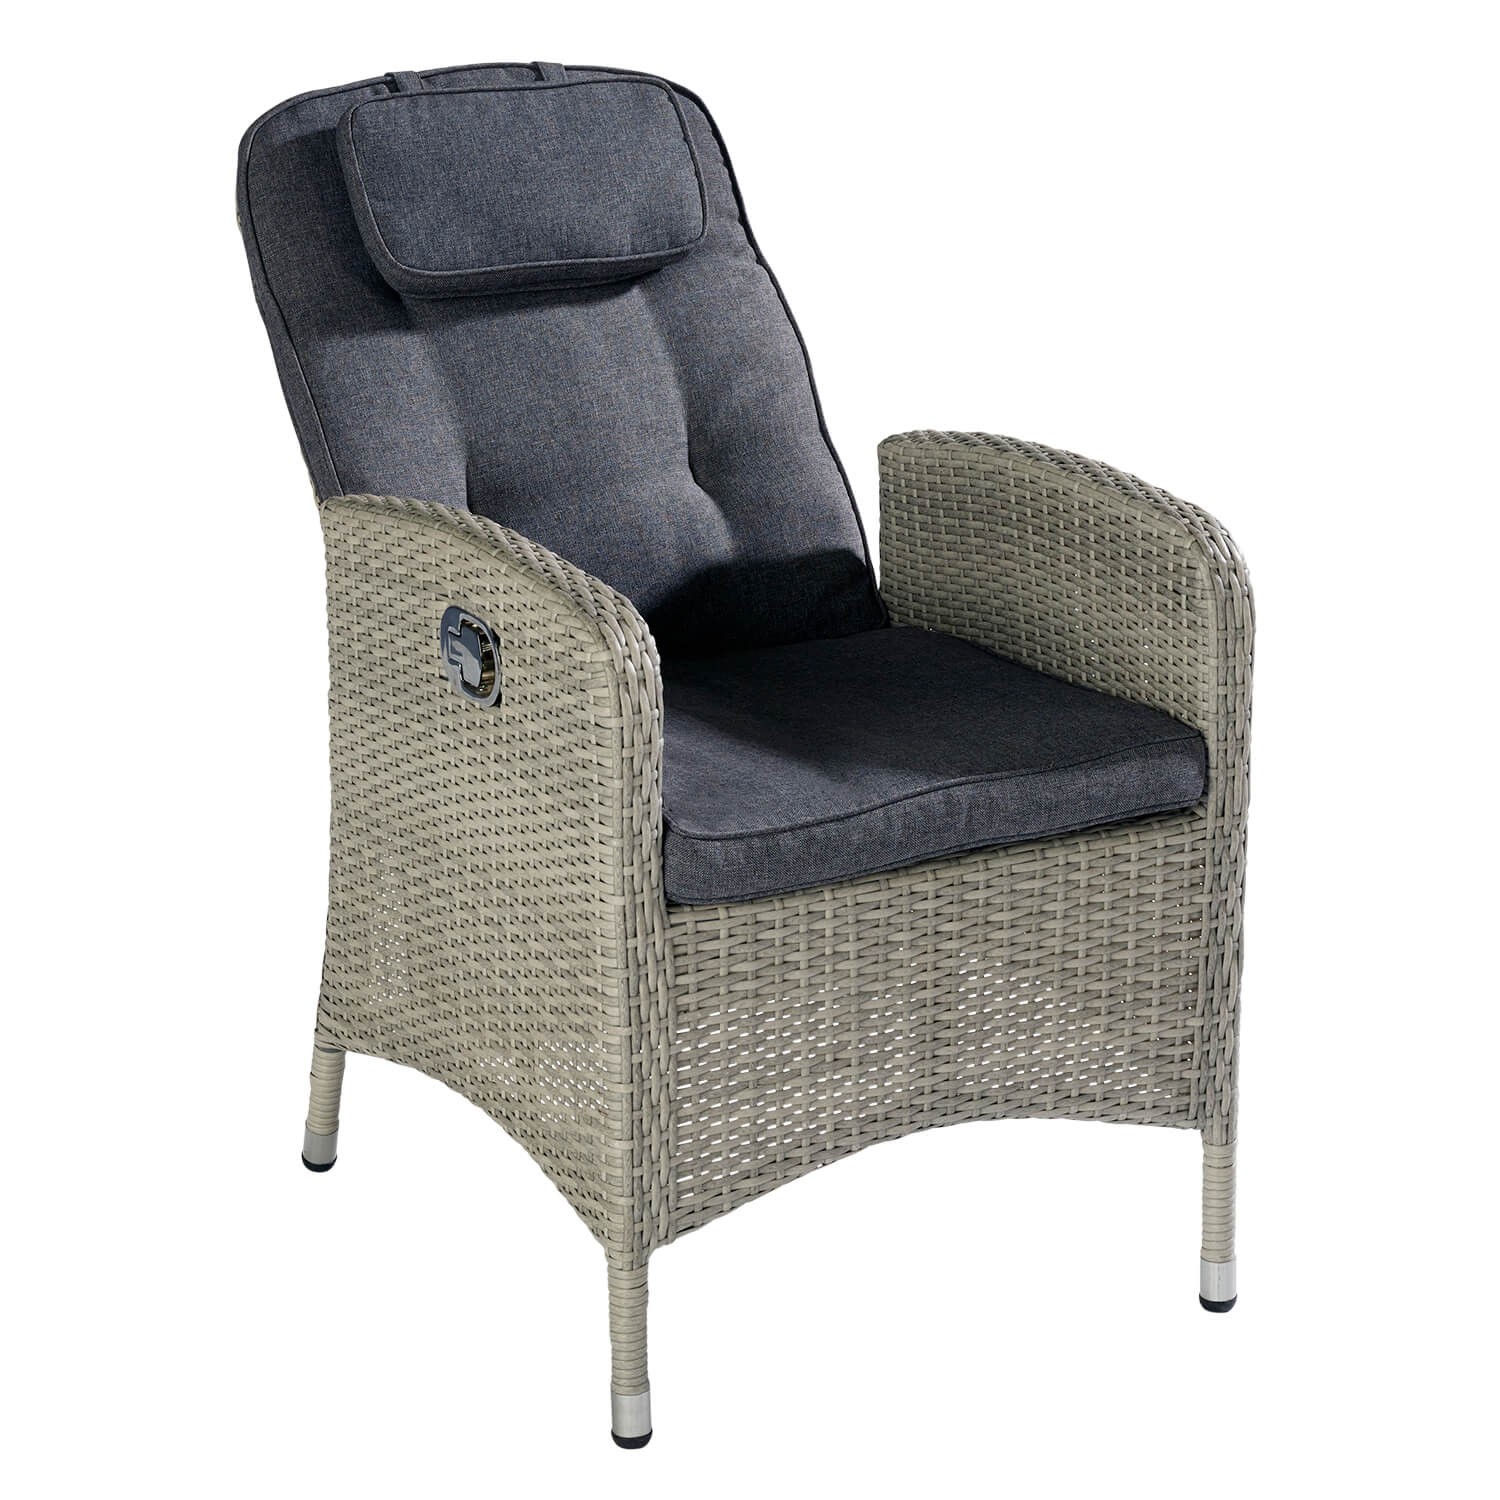 Hartman curve reclining dining chair with cushion in cool